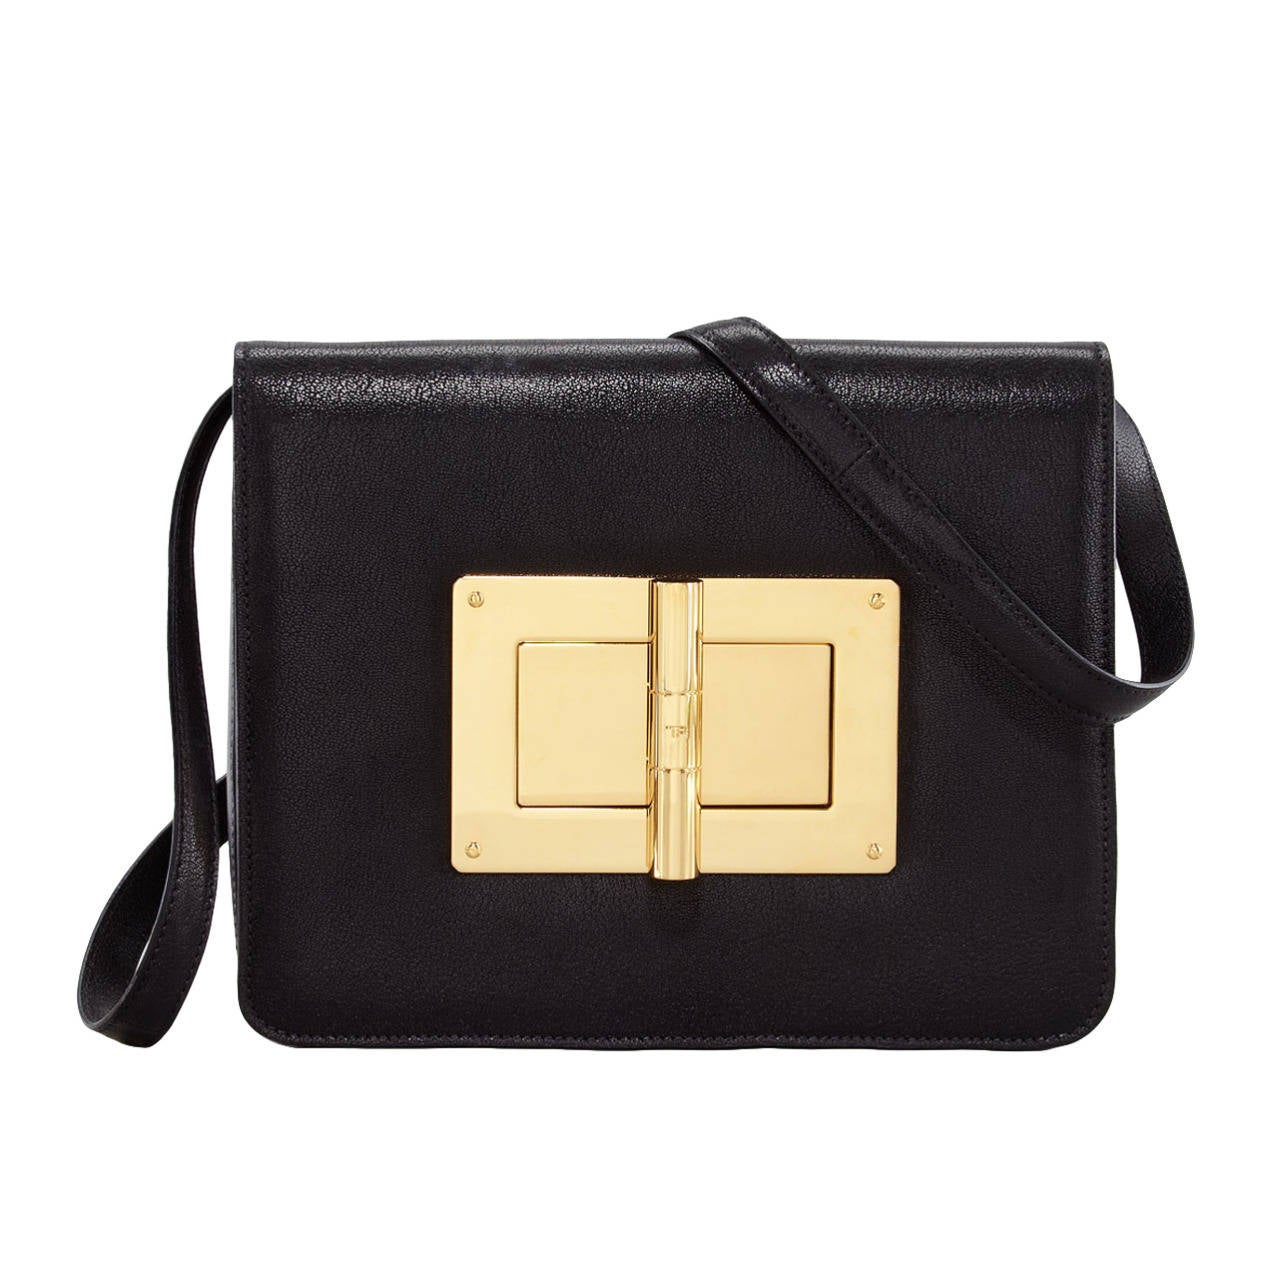 2013 Tom Ford Natalia Large Leather Cross body Bag Retail $4140 For Sale